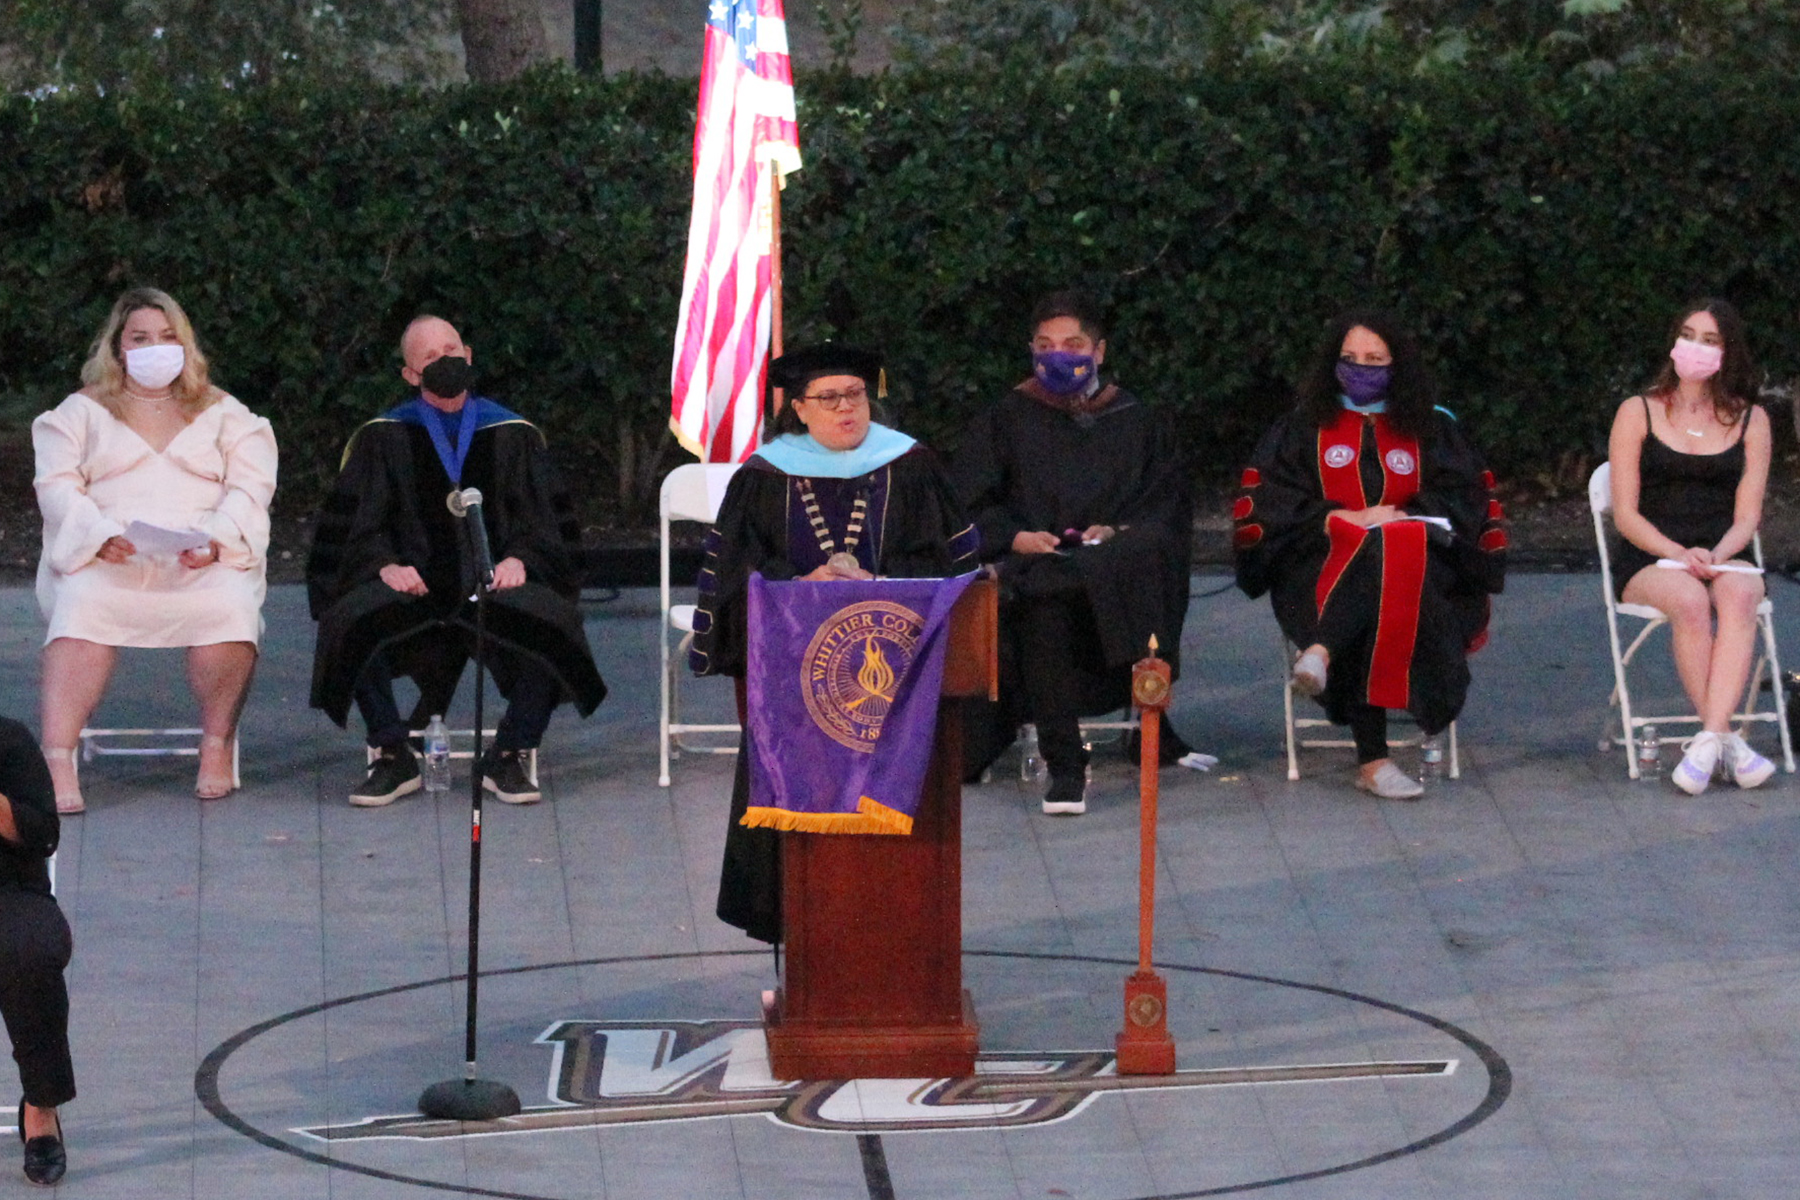 President Linda Oubré speaking at the President's Convocation and Light of Learning Ceremony